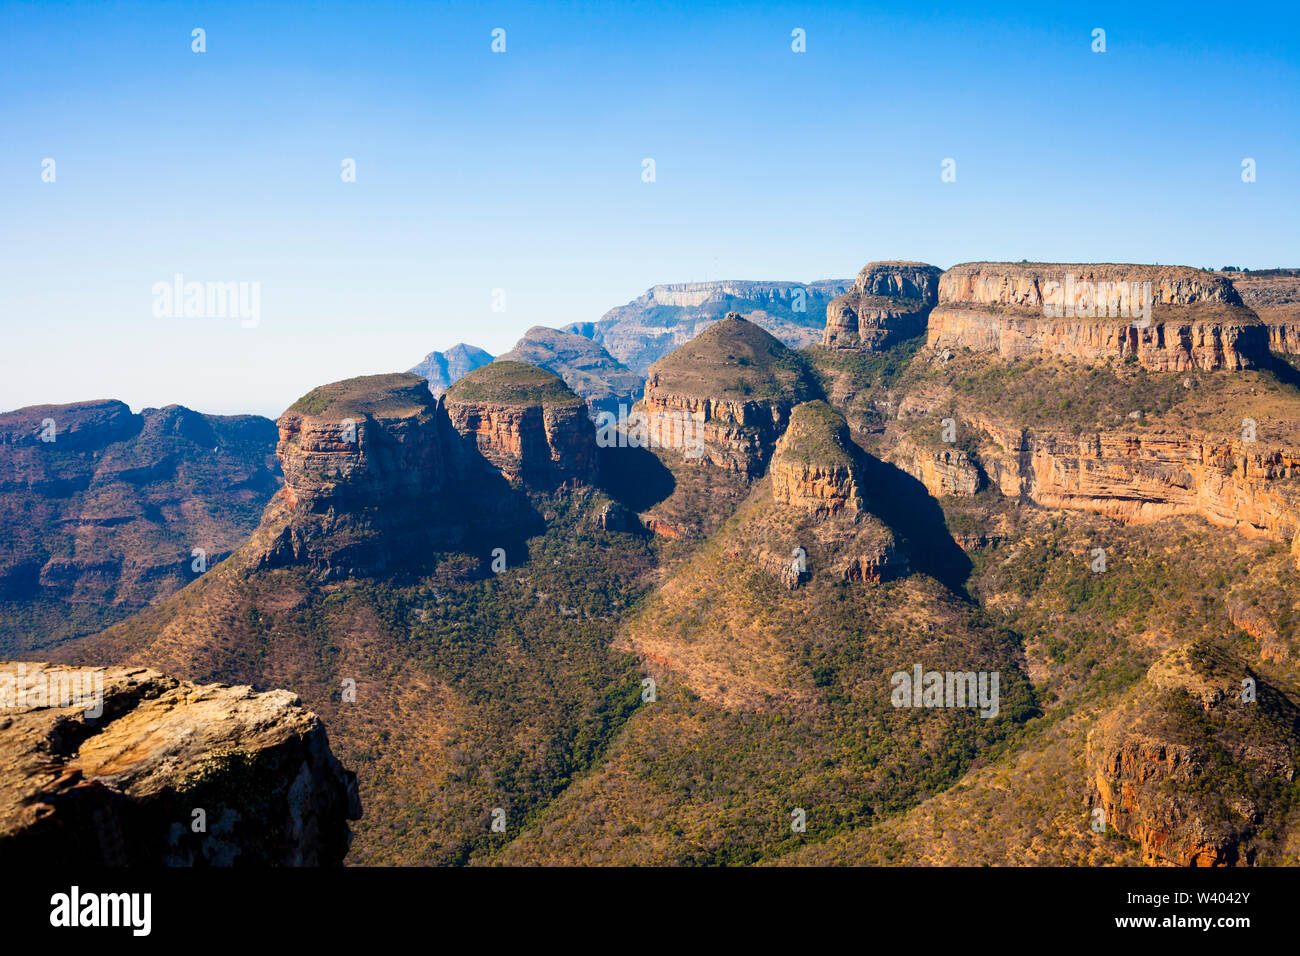 Stunning view of the Three Rondavels, huge round rocks thought to be reminiscent of the huts of indigenous people , Mpumalanga region, South Africa Stock Photo